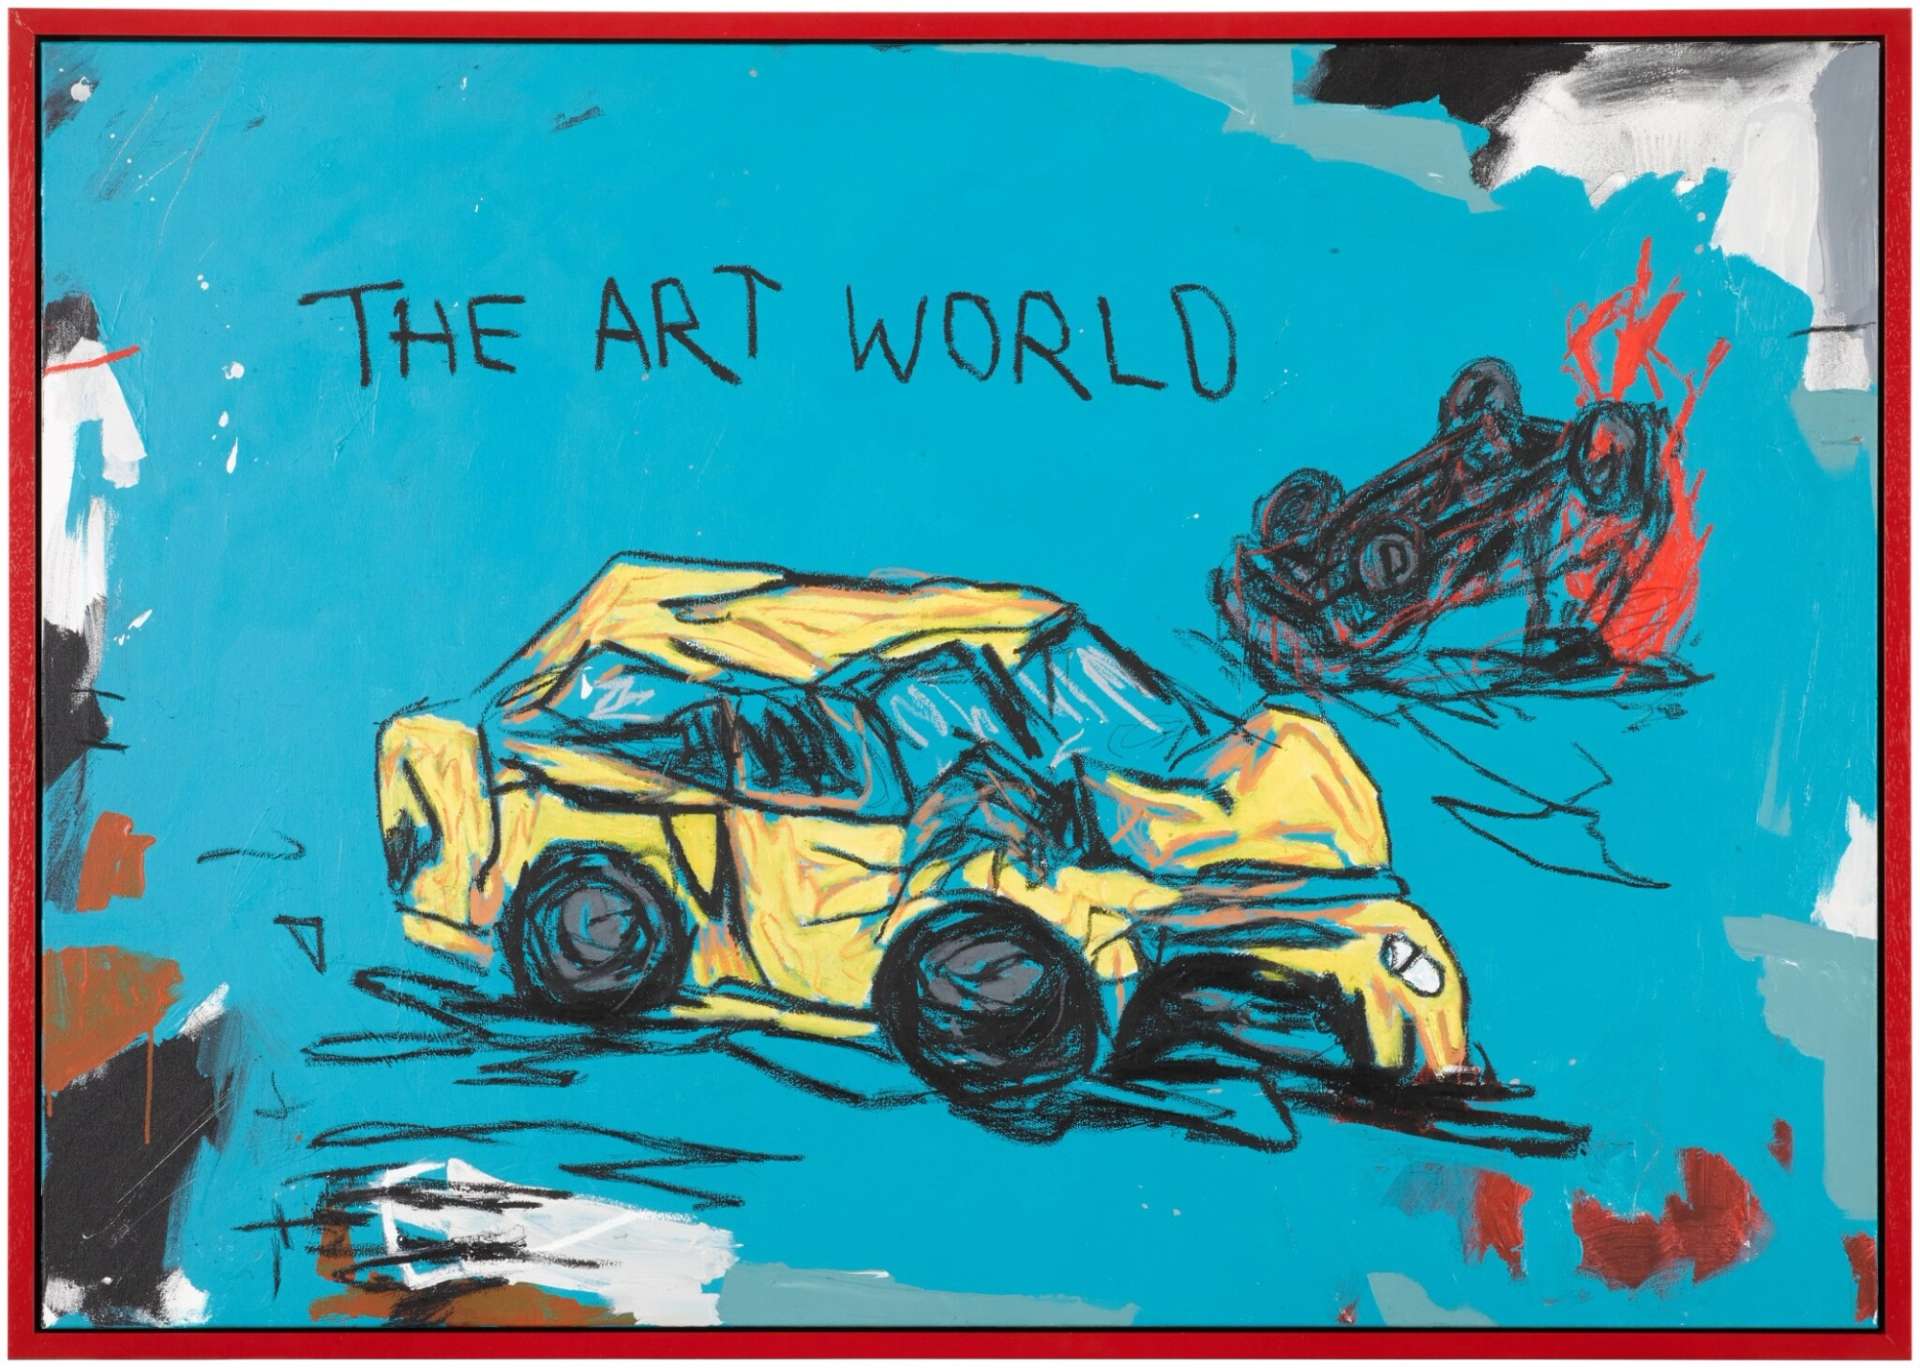 A sketch of a yellow car and a smaller overturned car on fire set on a sky blue background, with ‘THE ART WORLD’ handwritten in capitals above them.